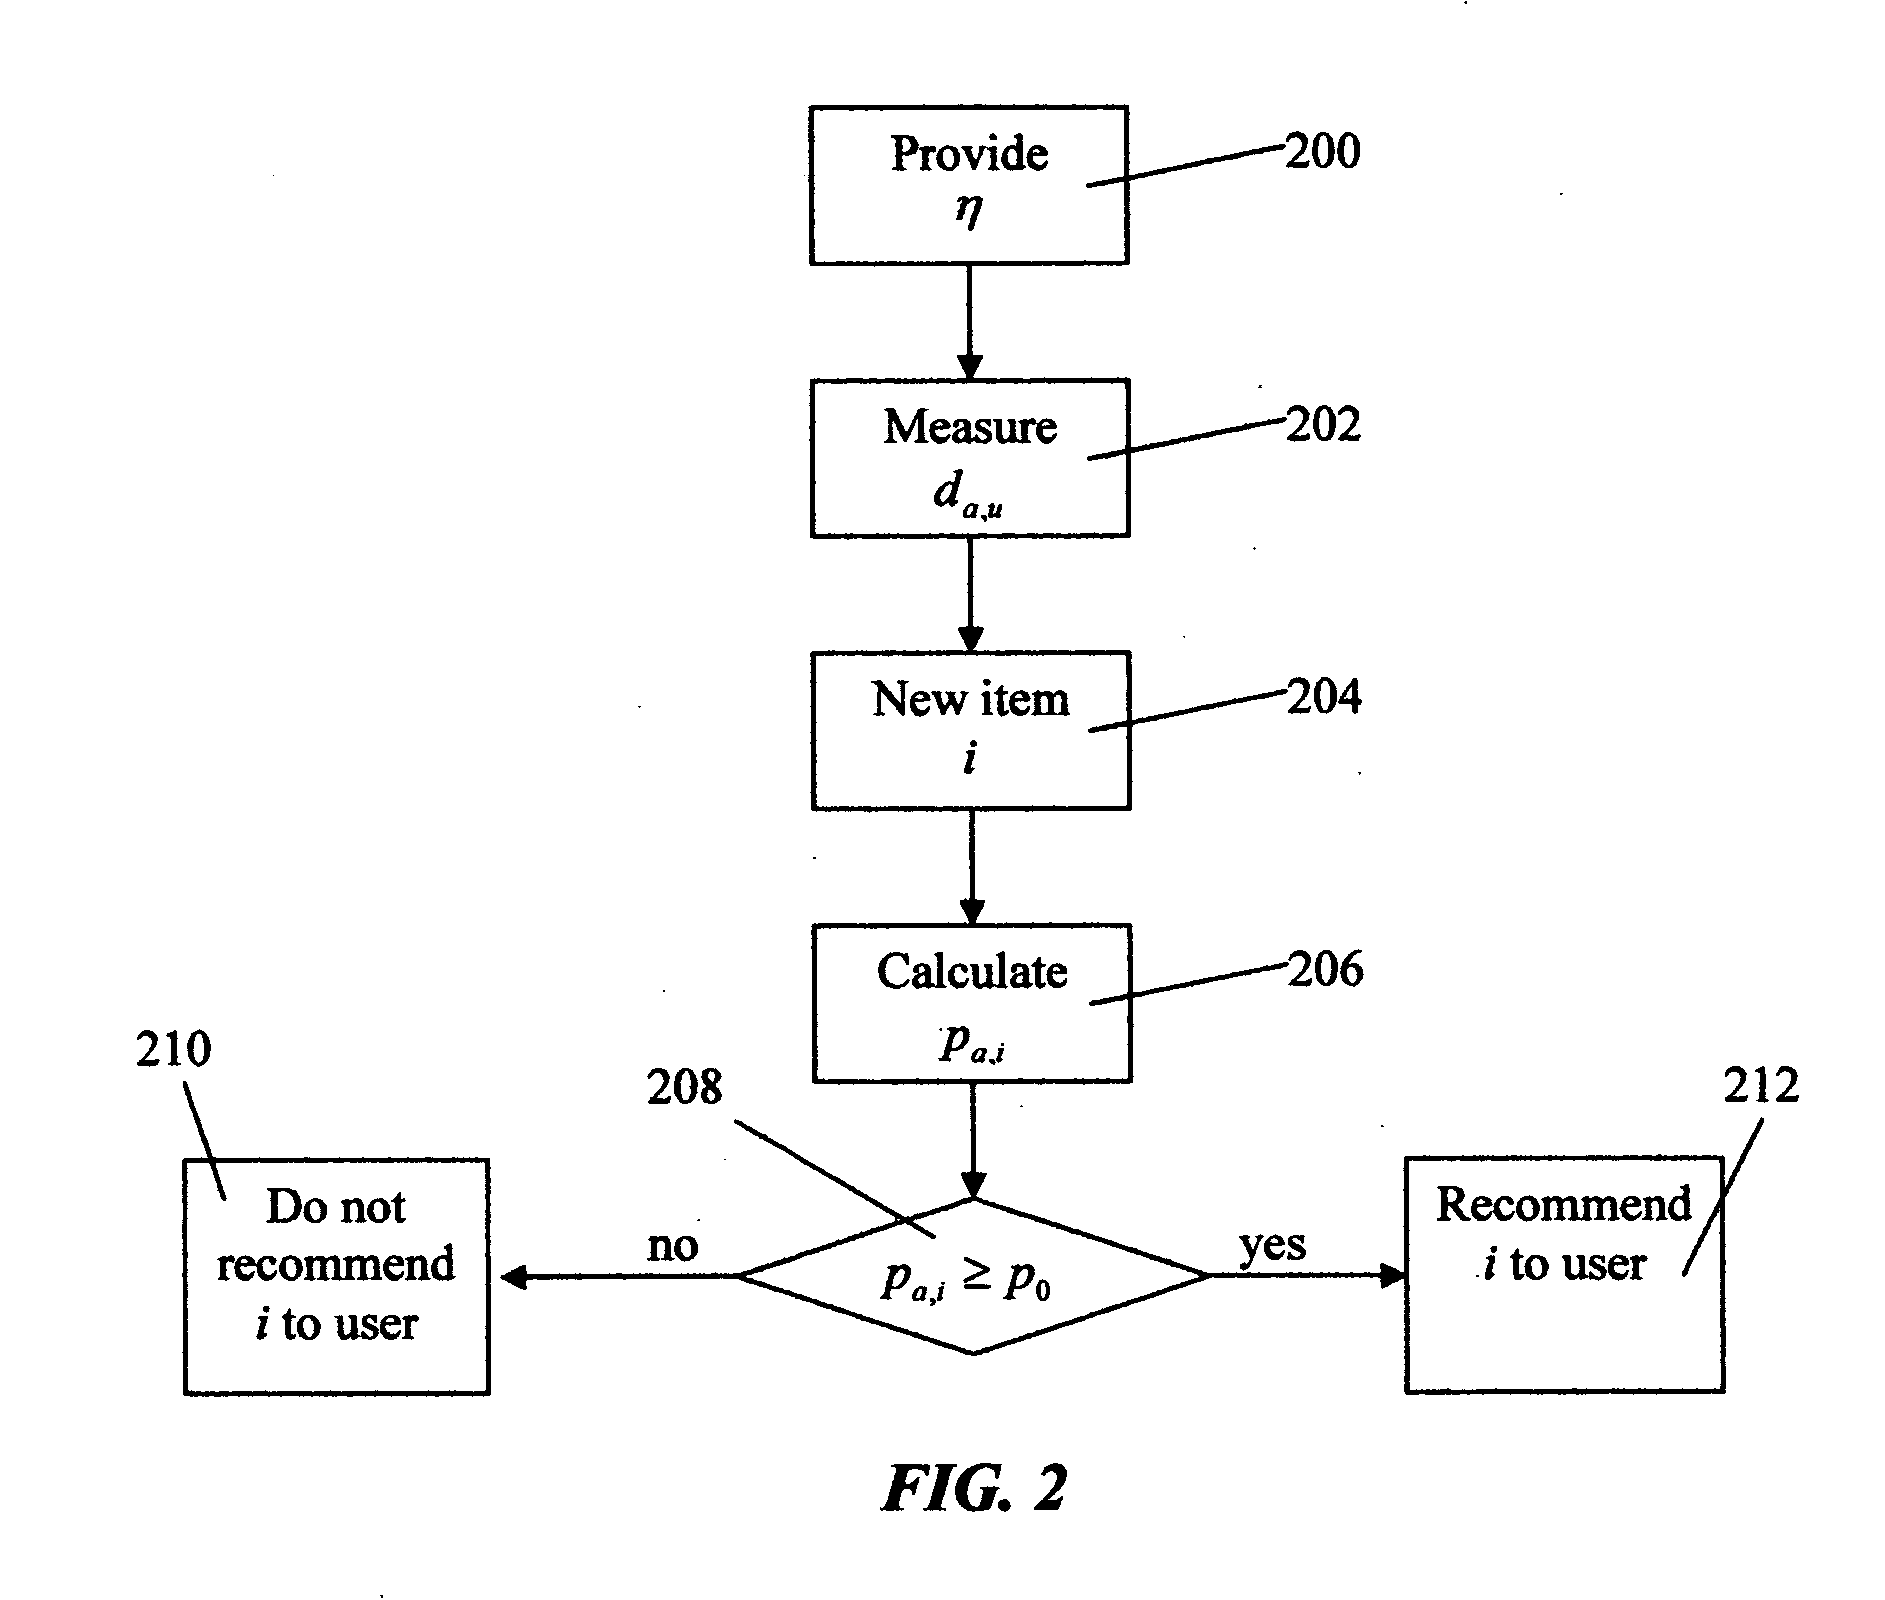 System and method for utilizing social networks for collaborative filtering